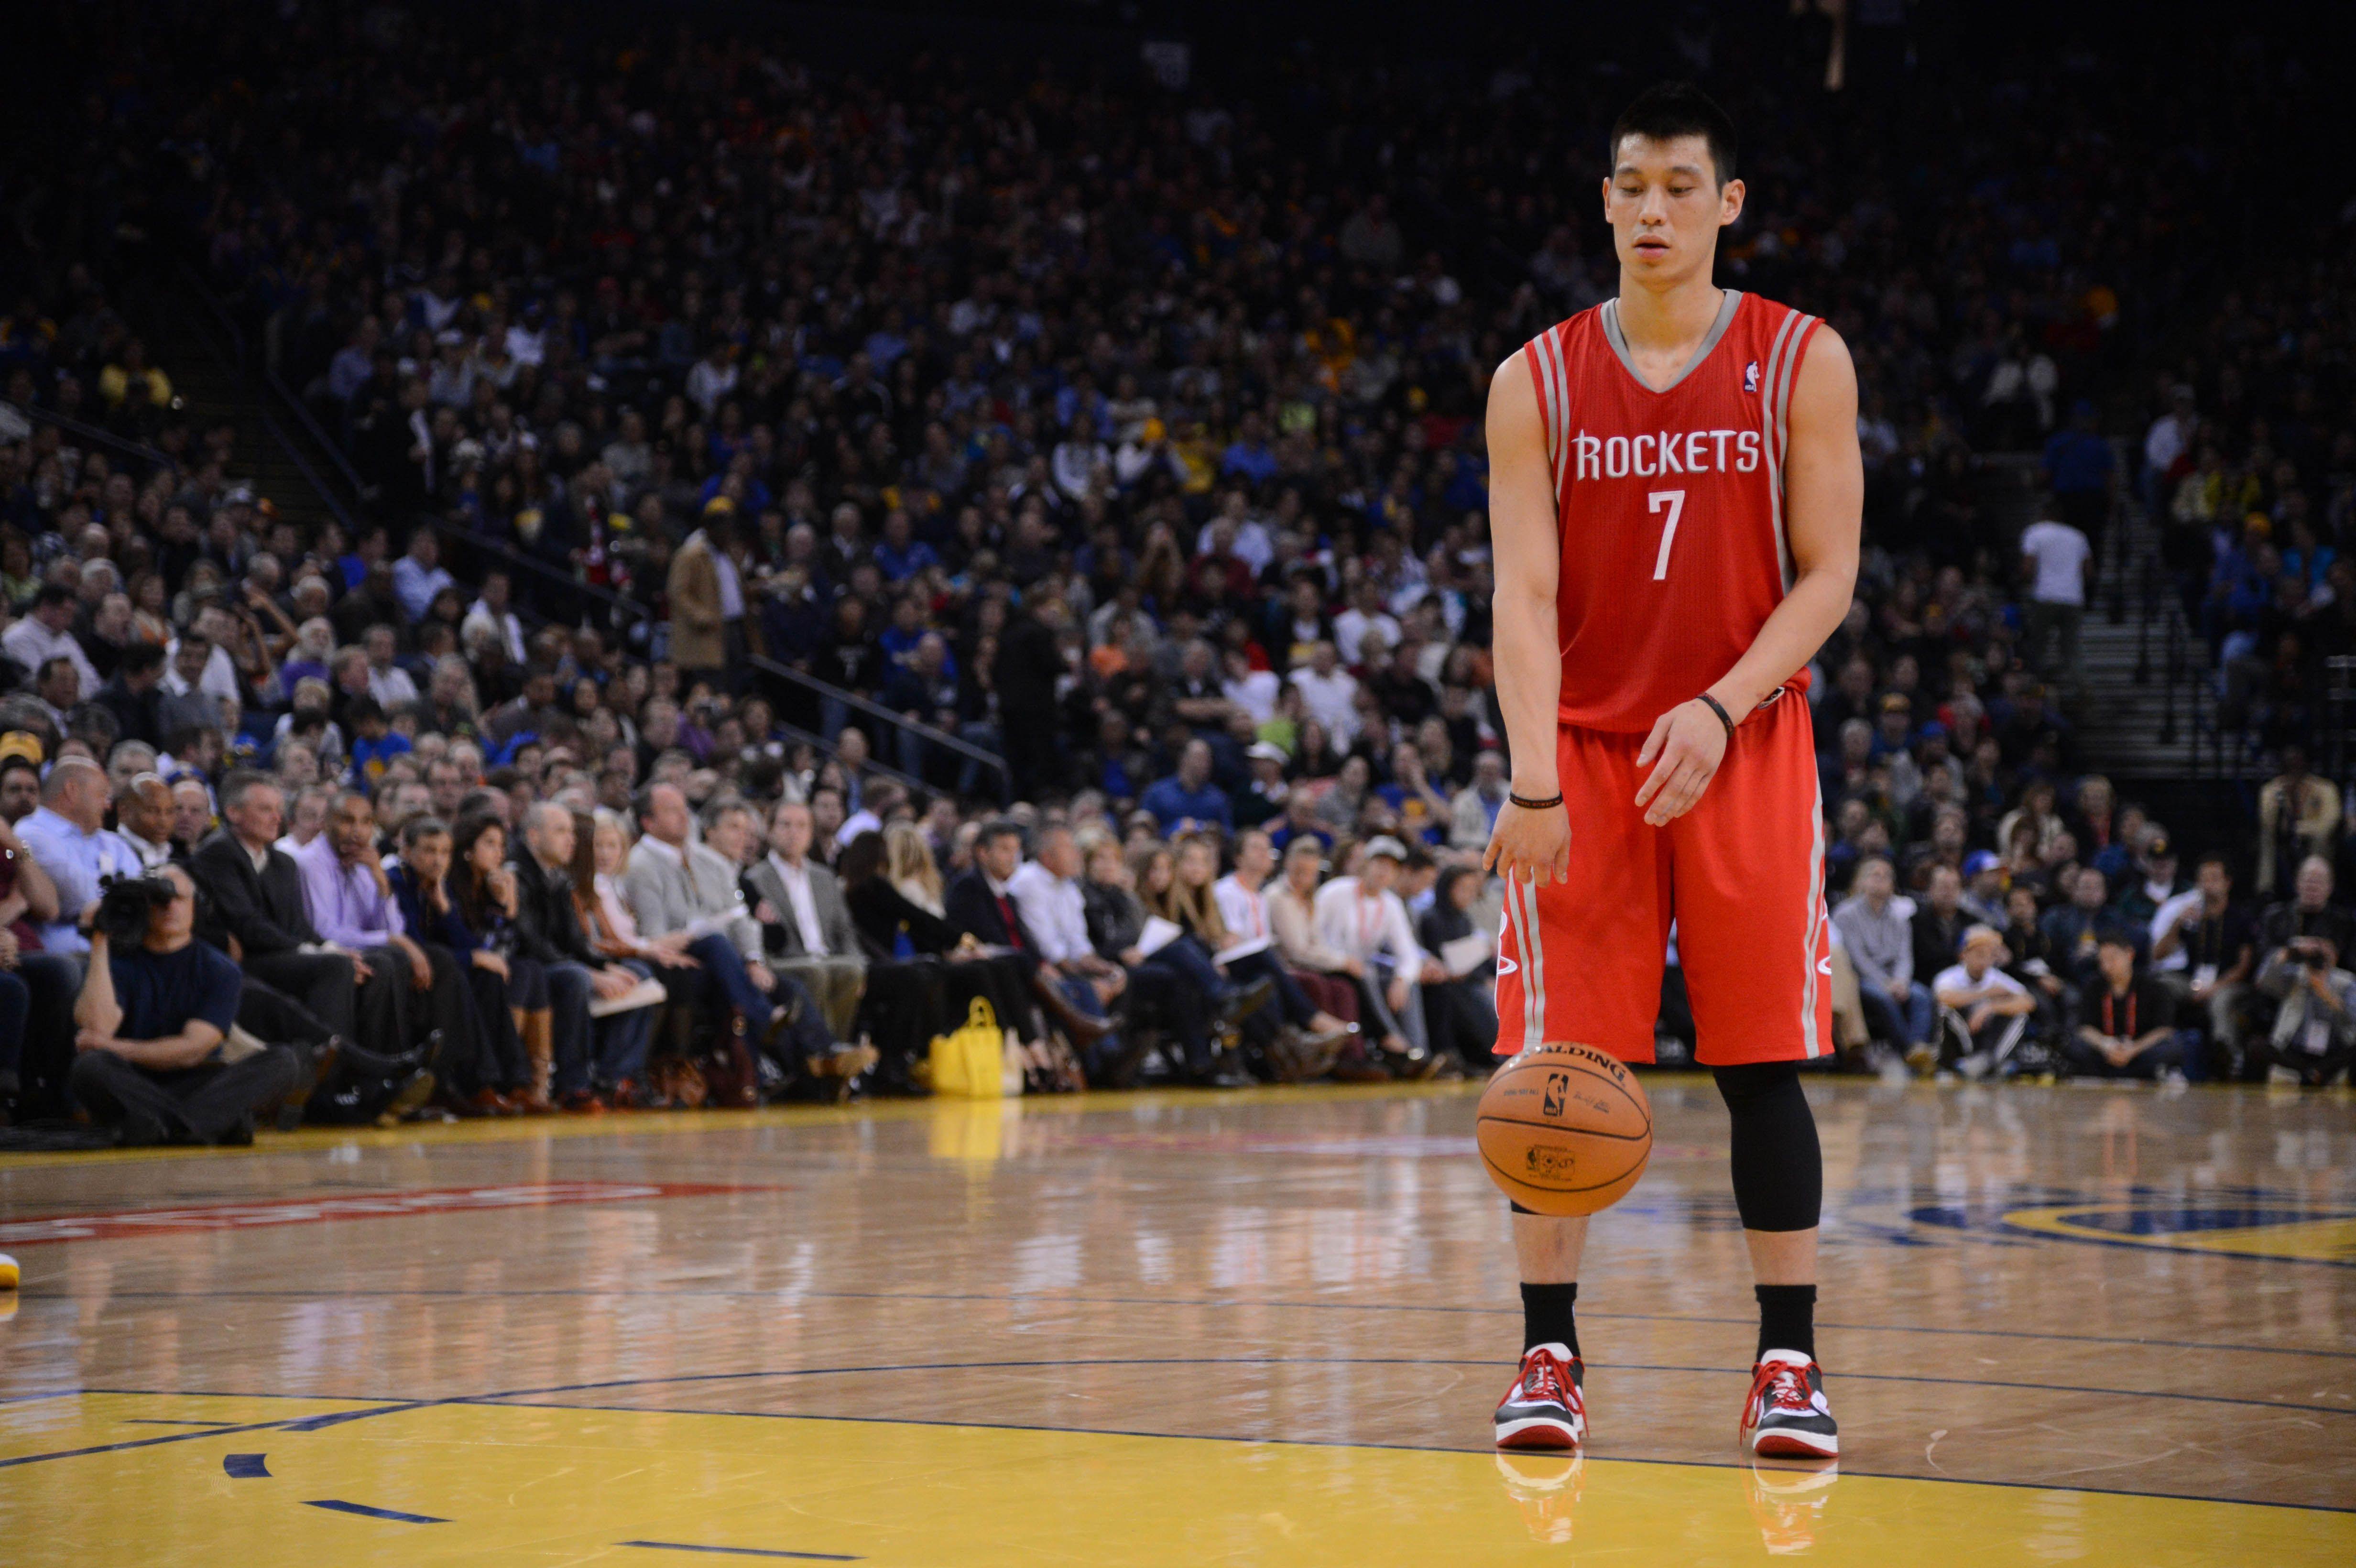 Wallpapers Of The Day: Jeremy Lin